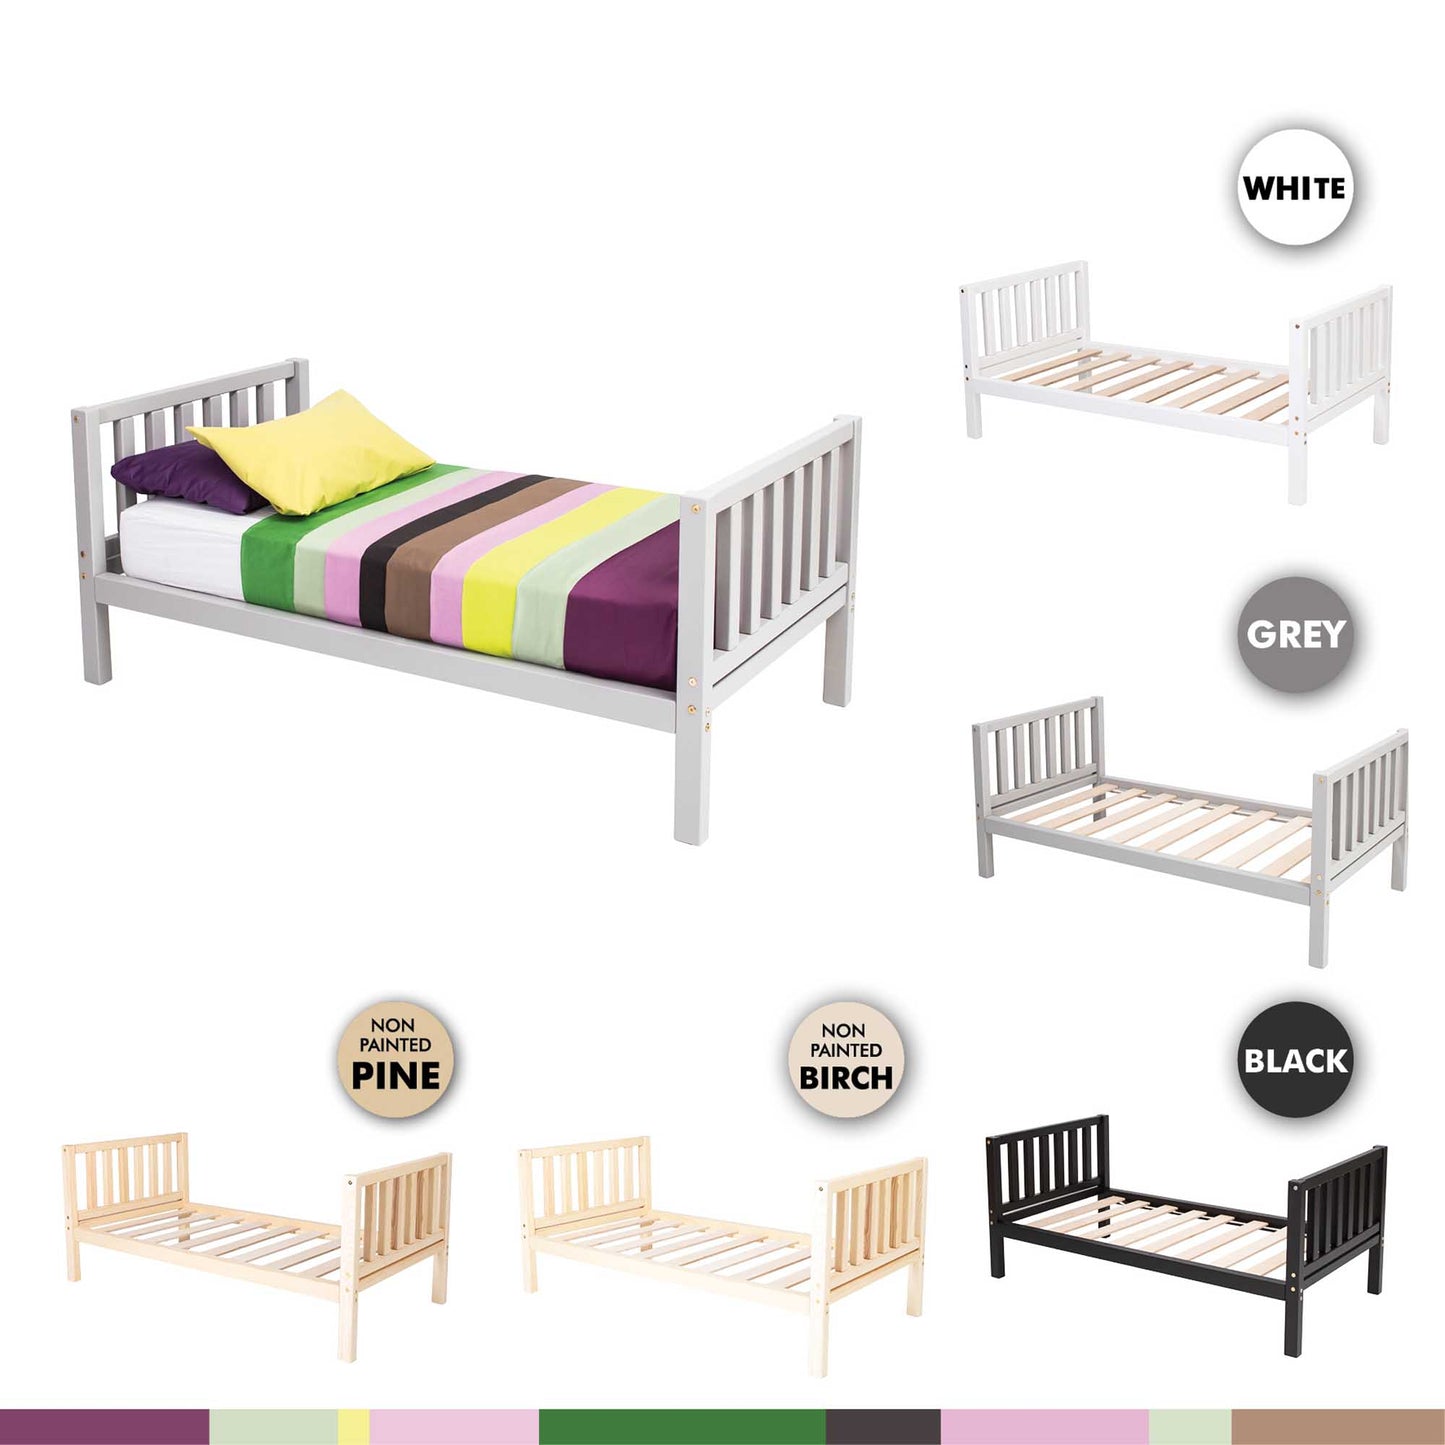 2-in-1 kid's bed on legs with a vertical rail headboard and footboard made from solid pine or birch wood, available in different colors and sizes.